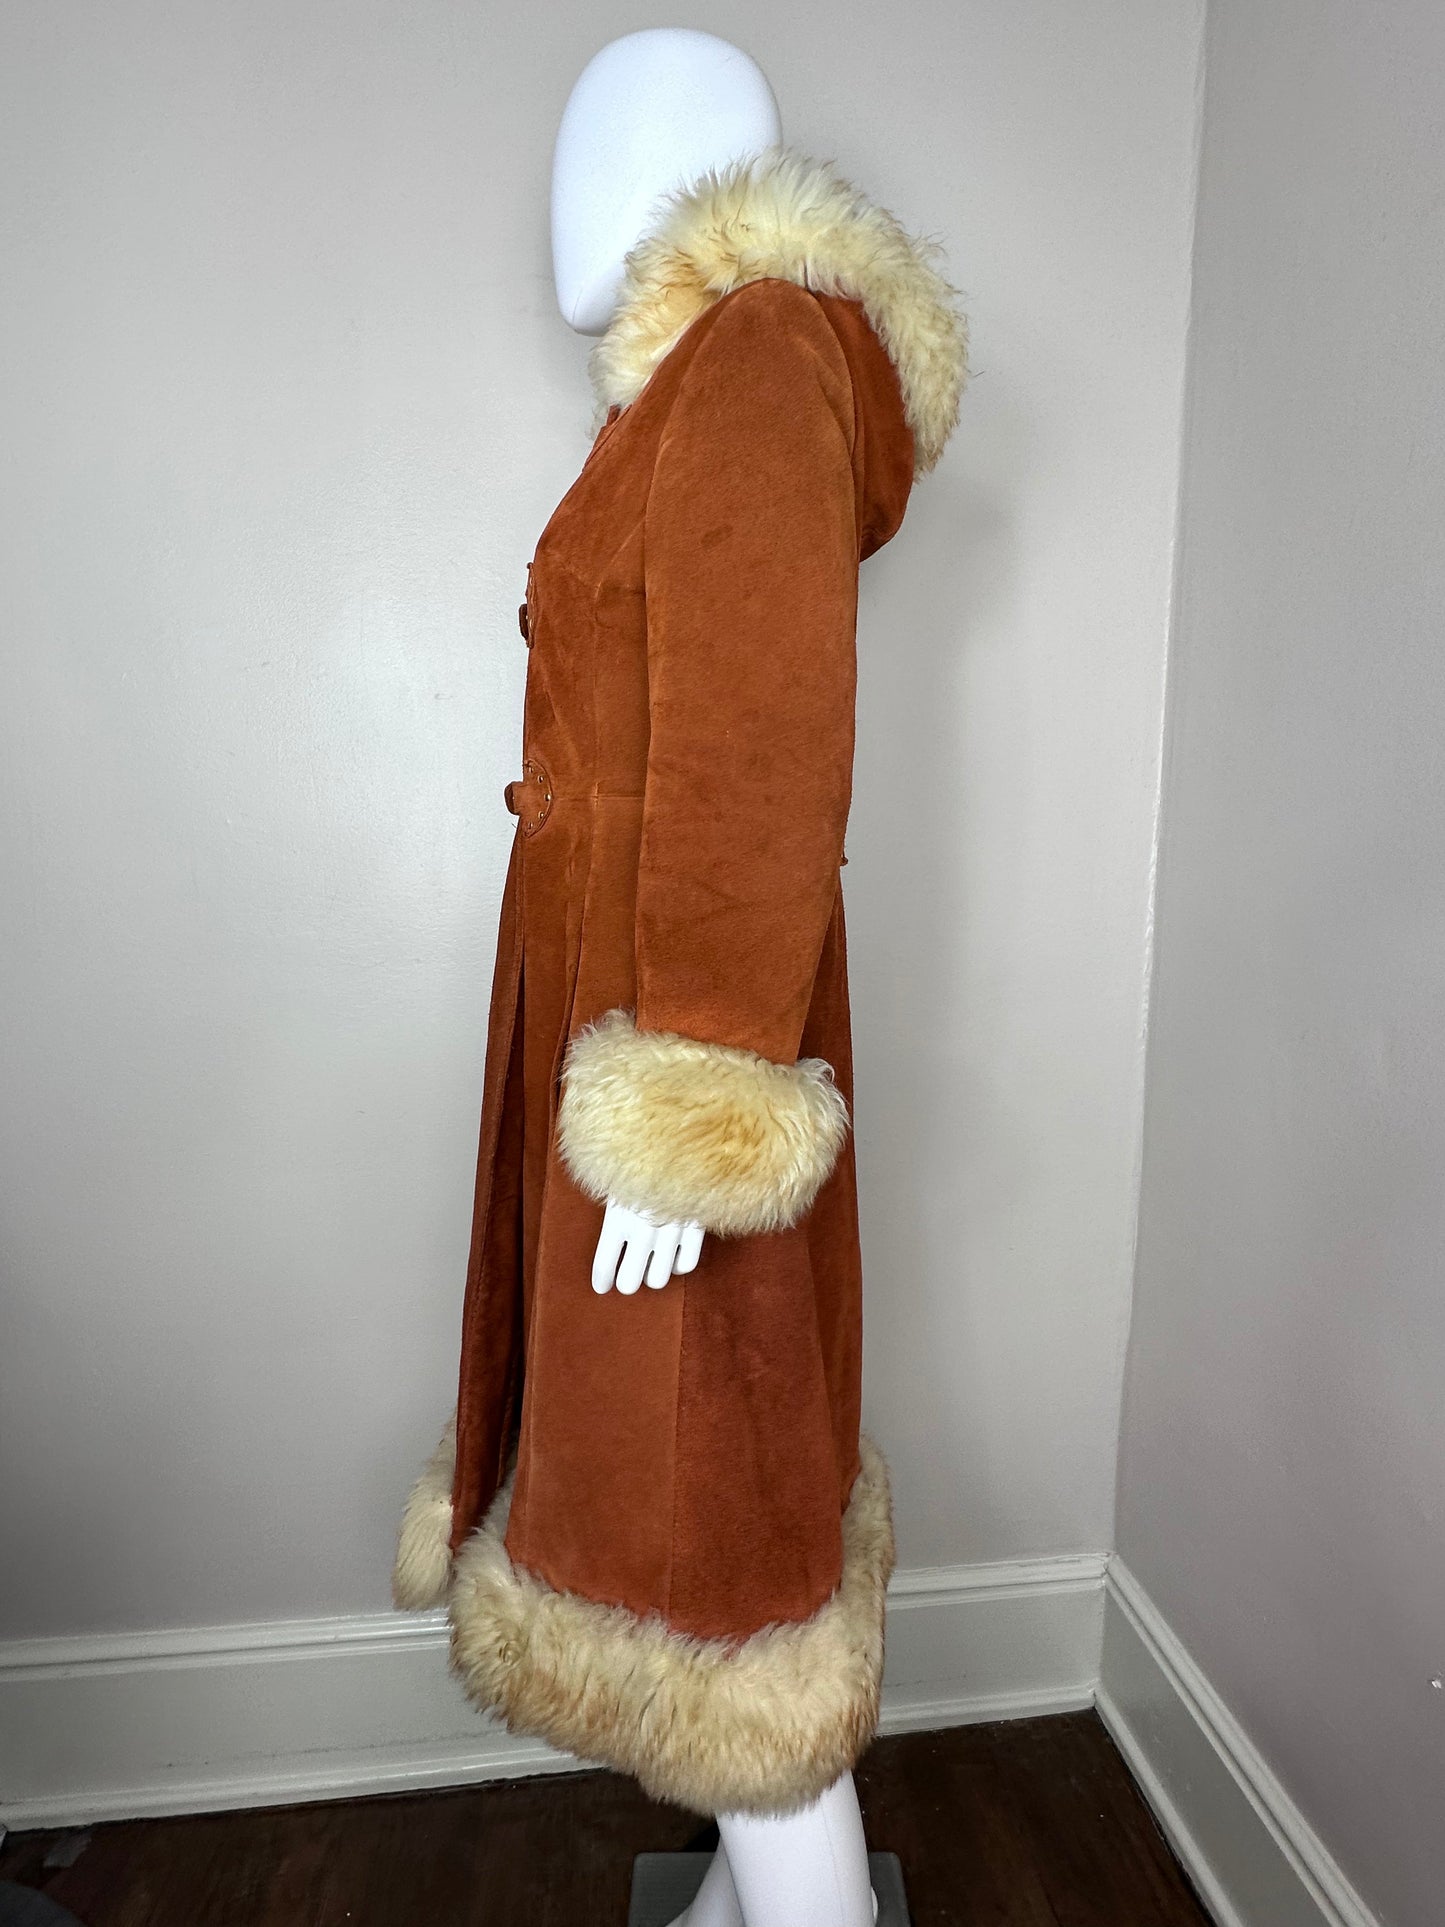 1970s Leather Coat with Lamb Fur Trim, Penny Lane, Irving Posluns Size Small